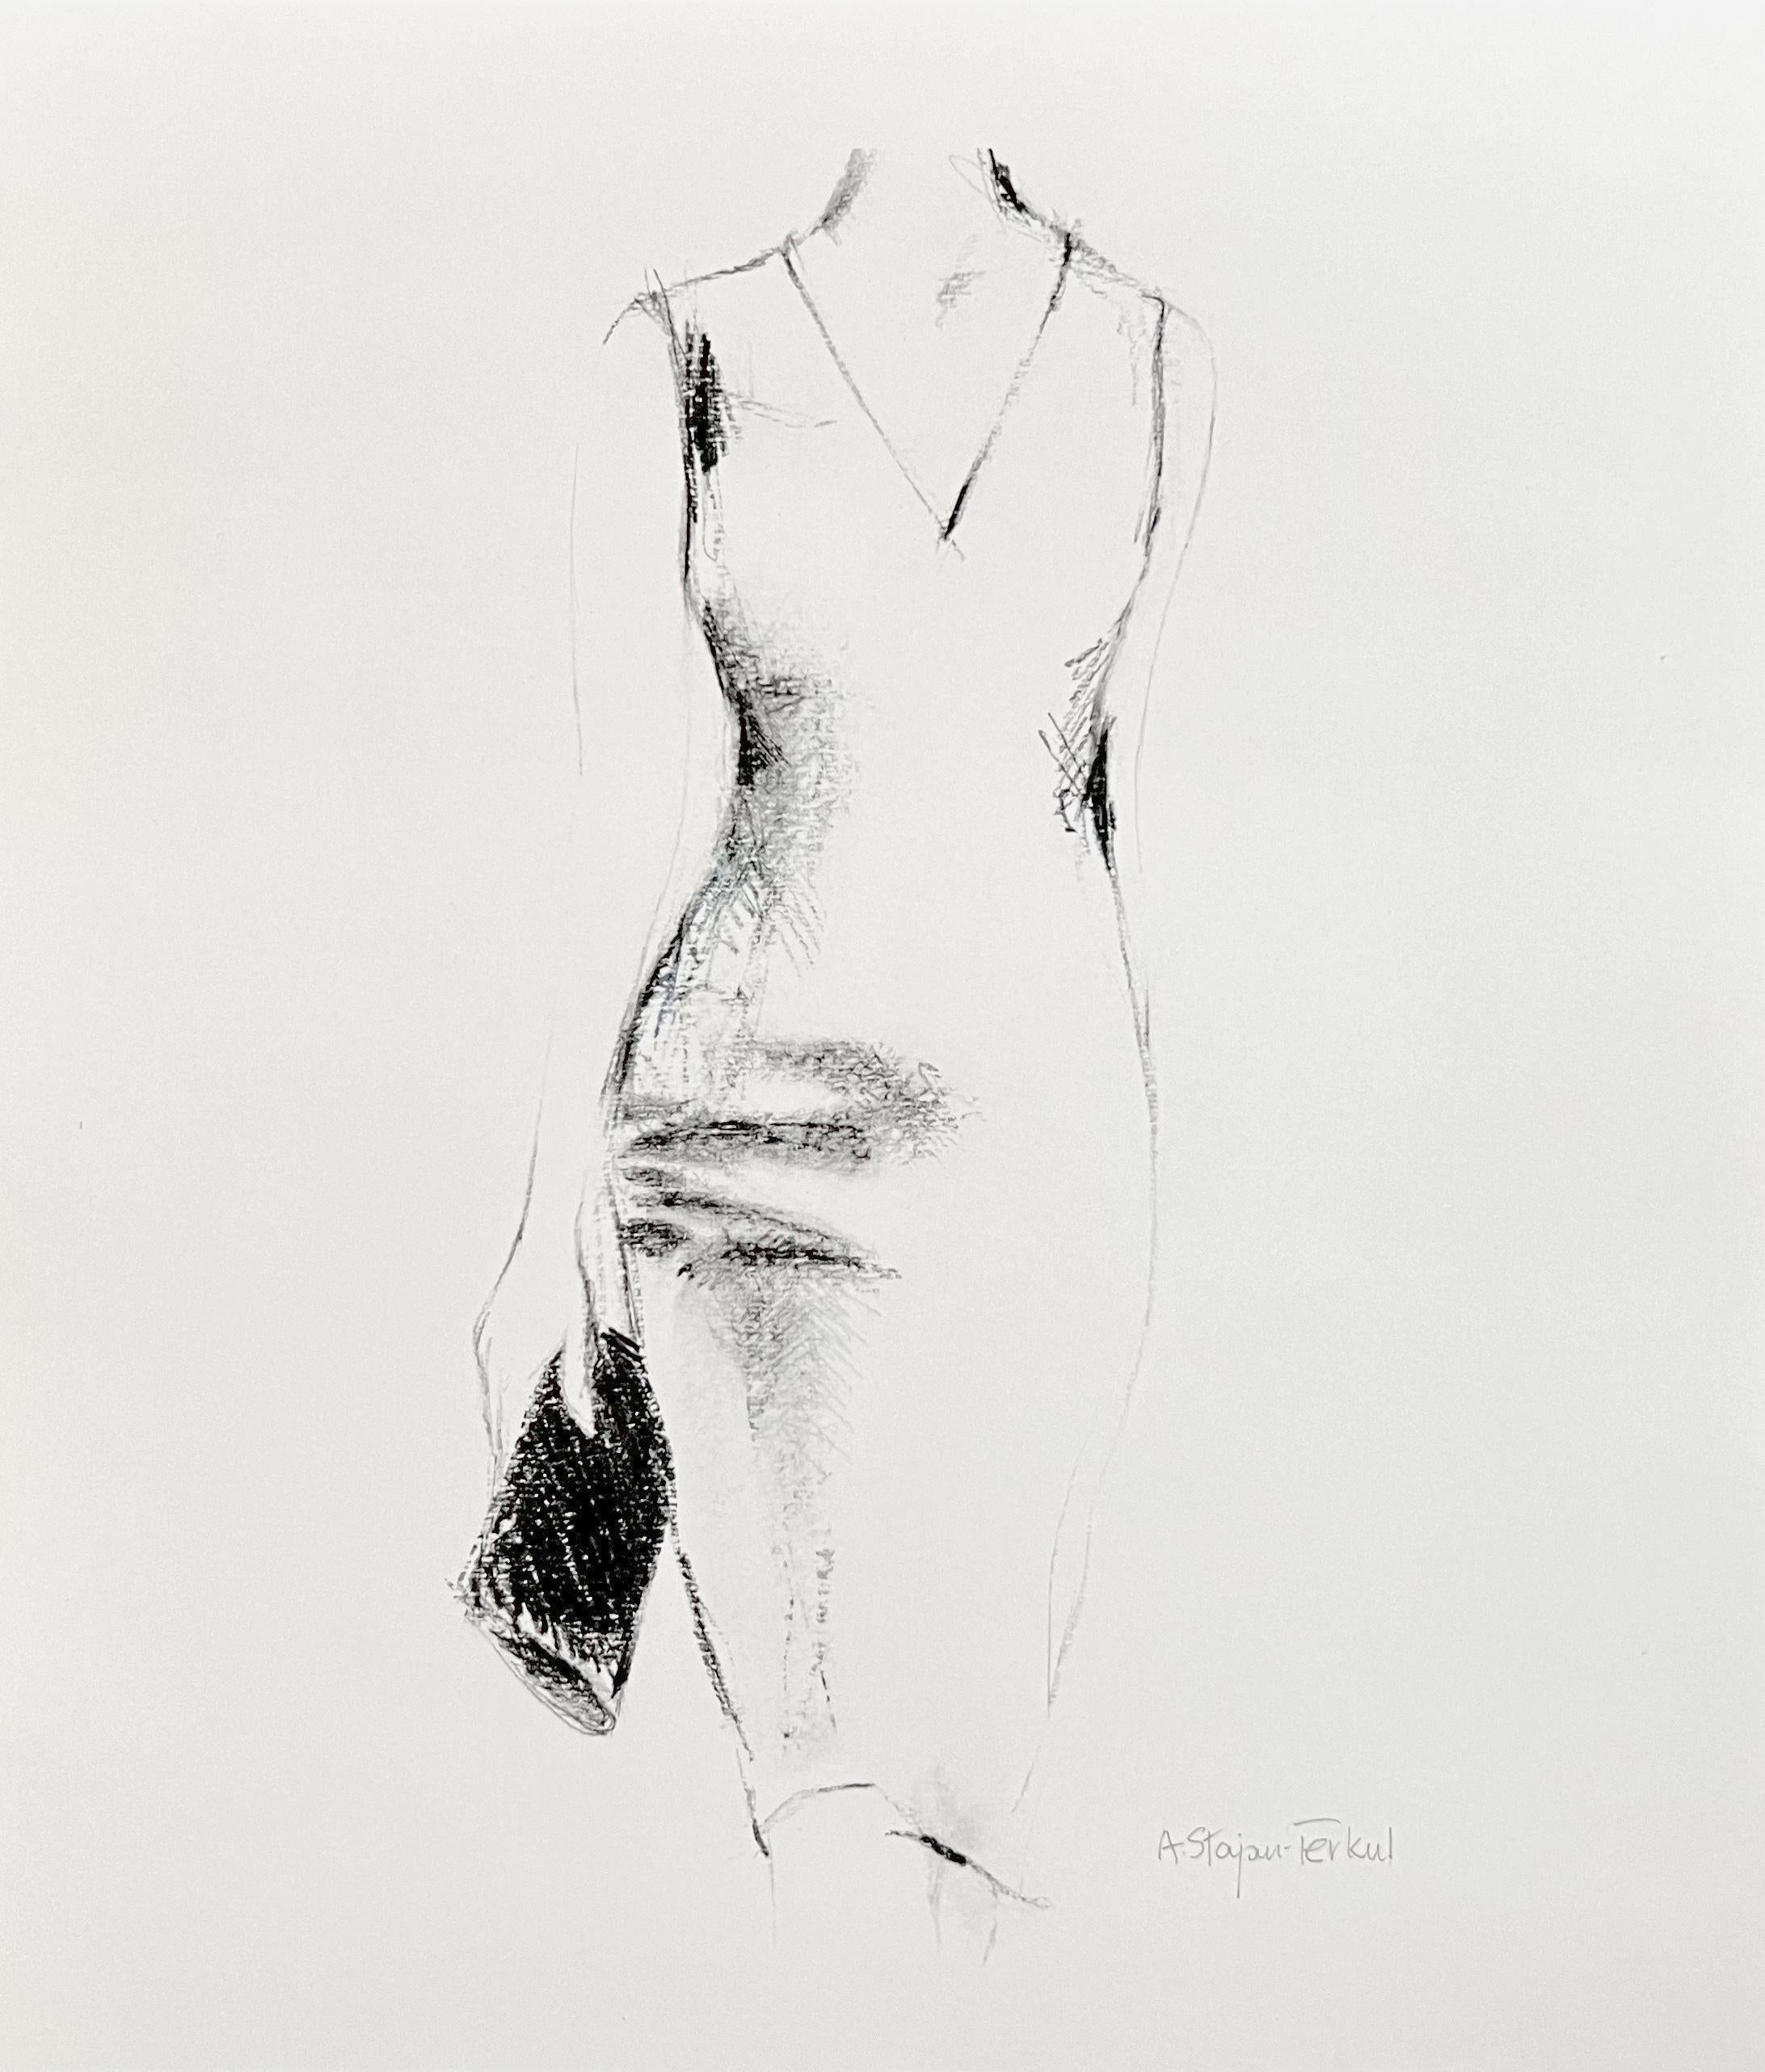 This art print on recycled paper features a strong yet minimalist figurative composition. A blend of detailed and expressive pencil work balances the contrast between dark and light. The art print exudes a contemporary and timeless aesthetic. Hand